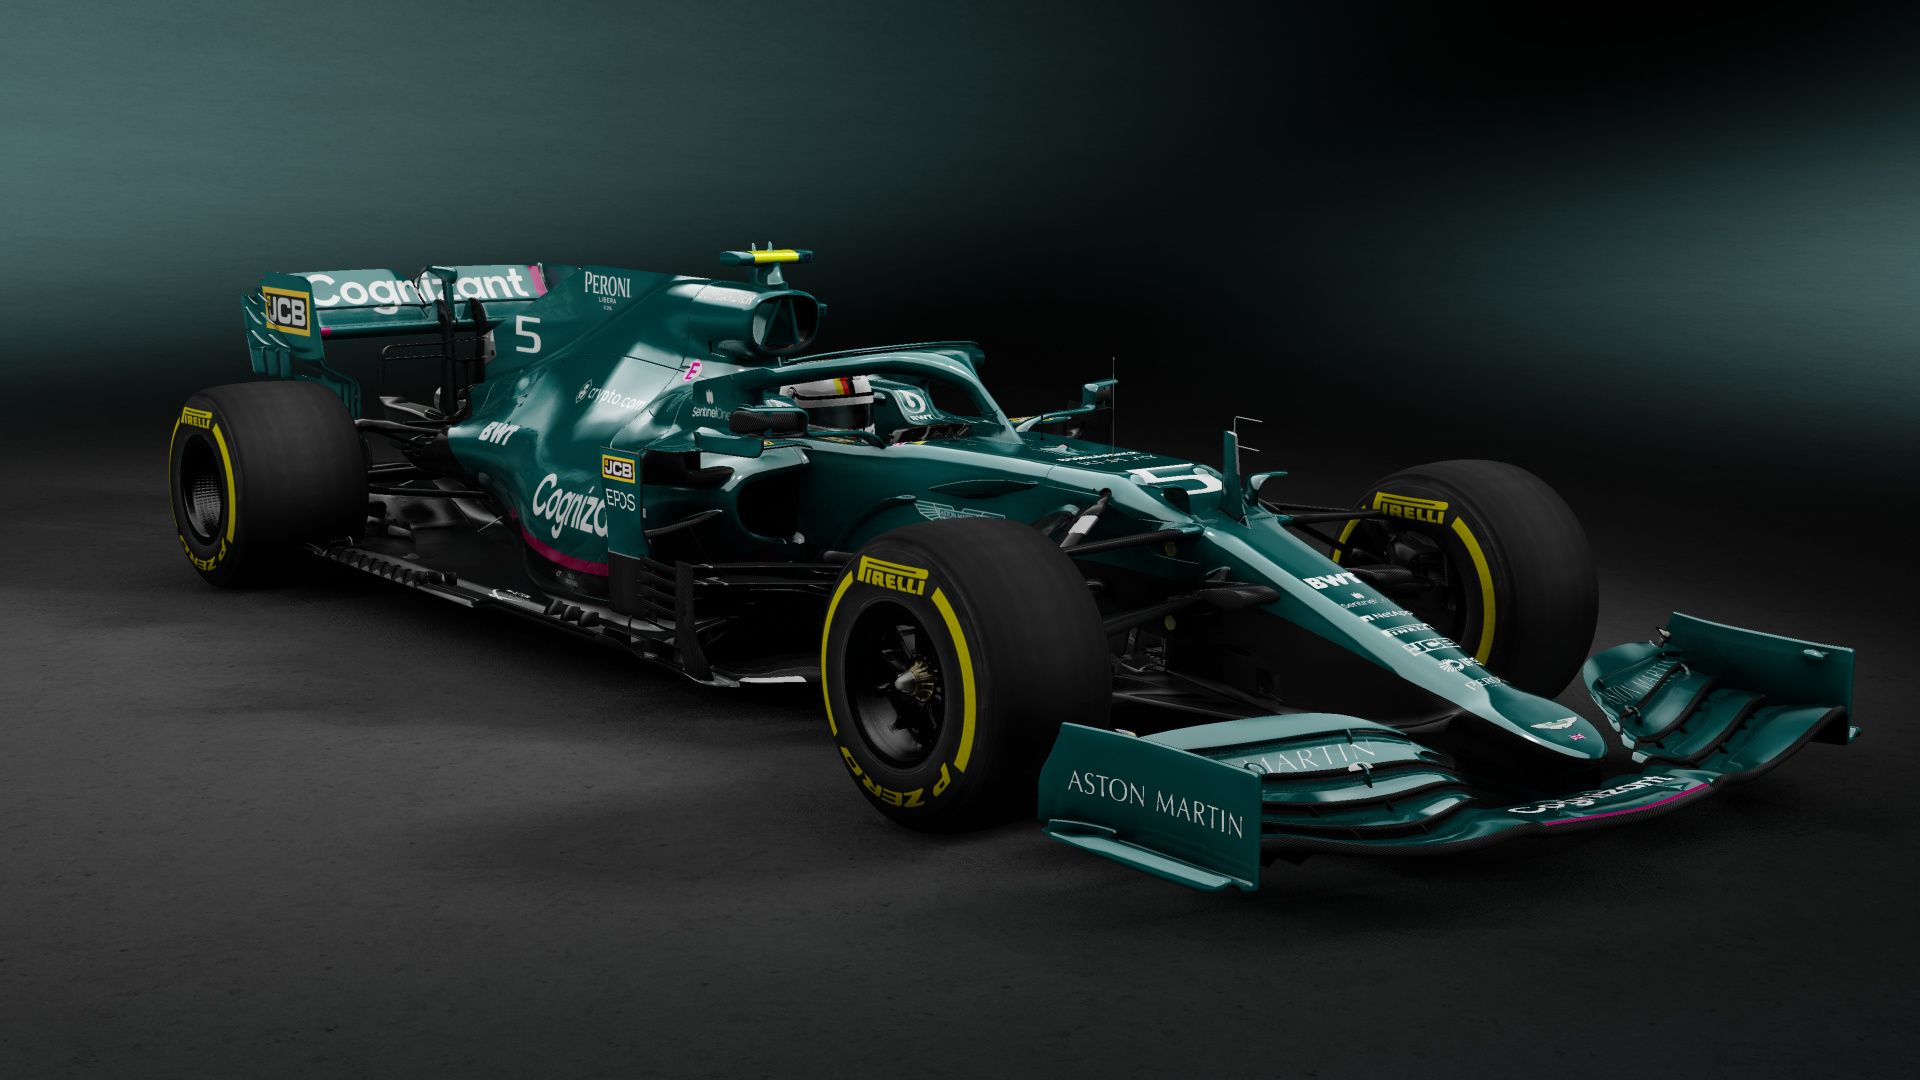 Aston Martin F1 2021 Livery Point RP20 Chassis